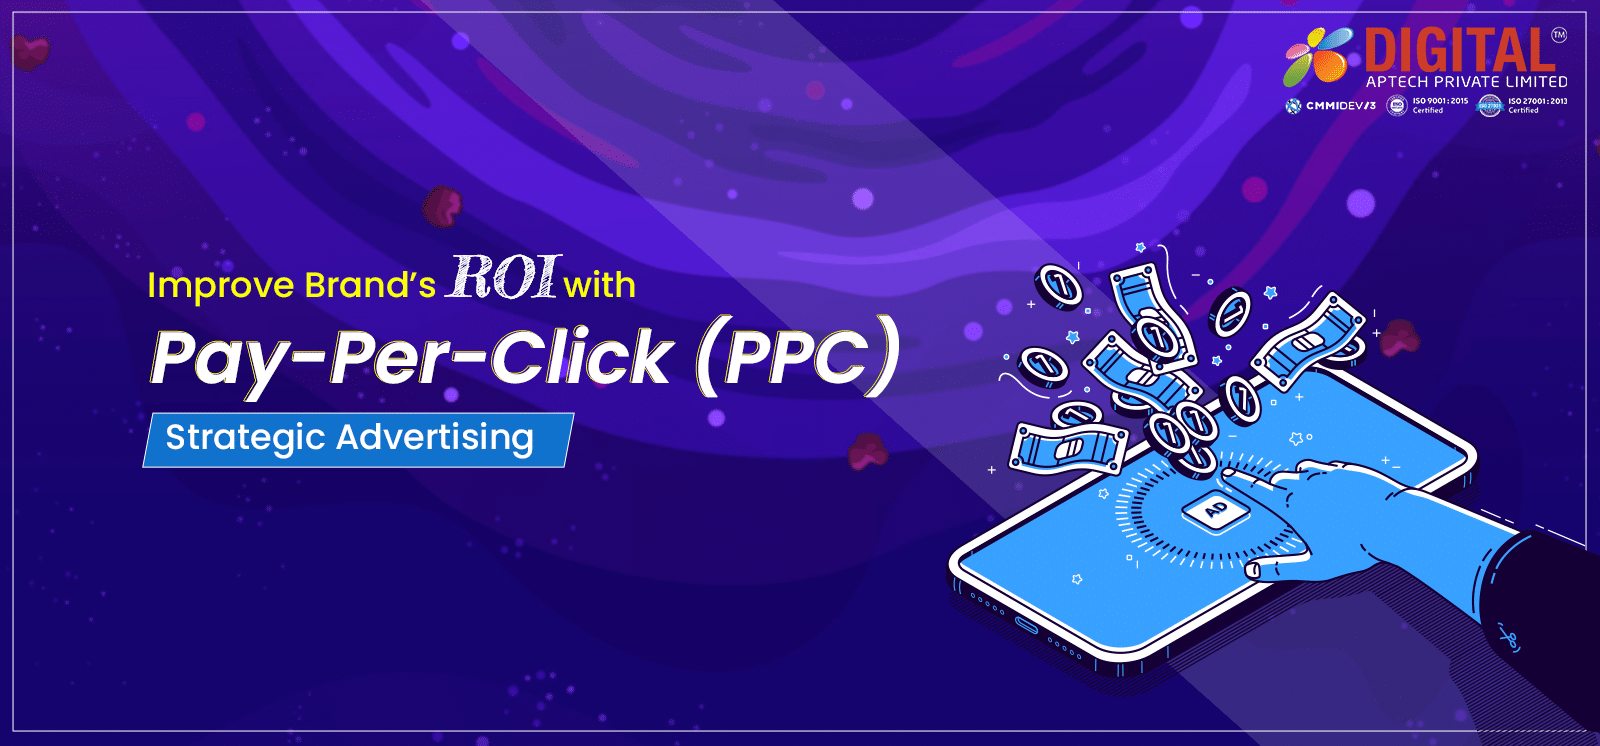 Improve Brand’s ROI with Pay-Per-Click (PPC) Strategic Advertising